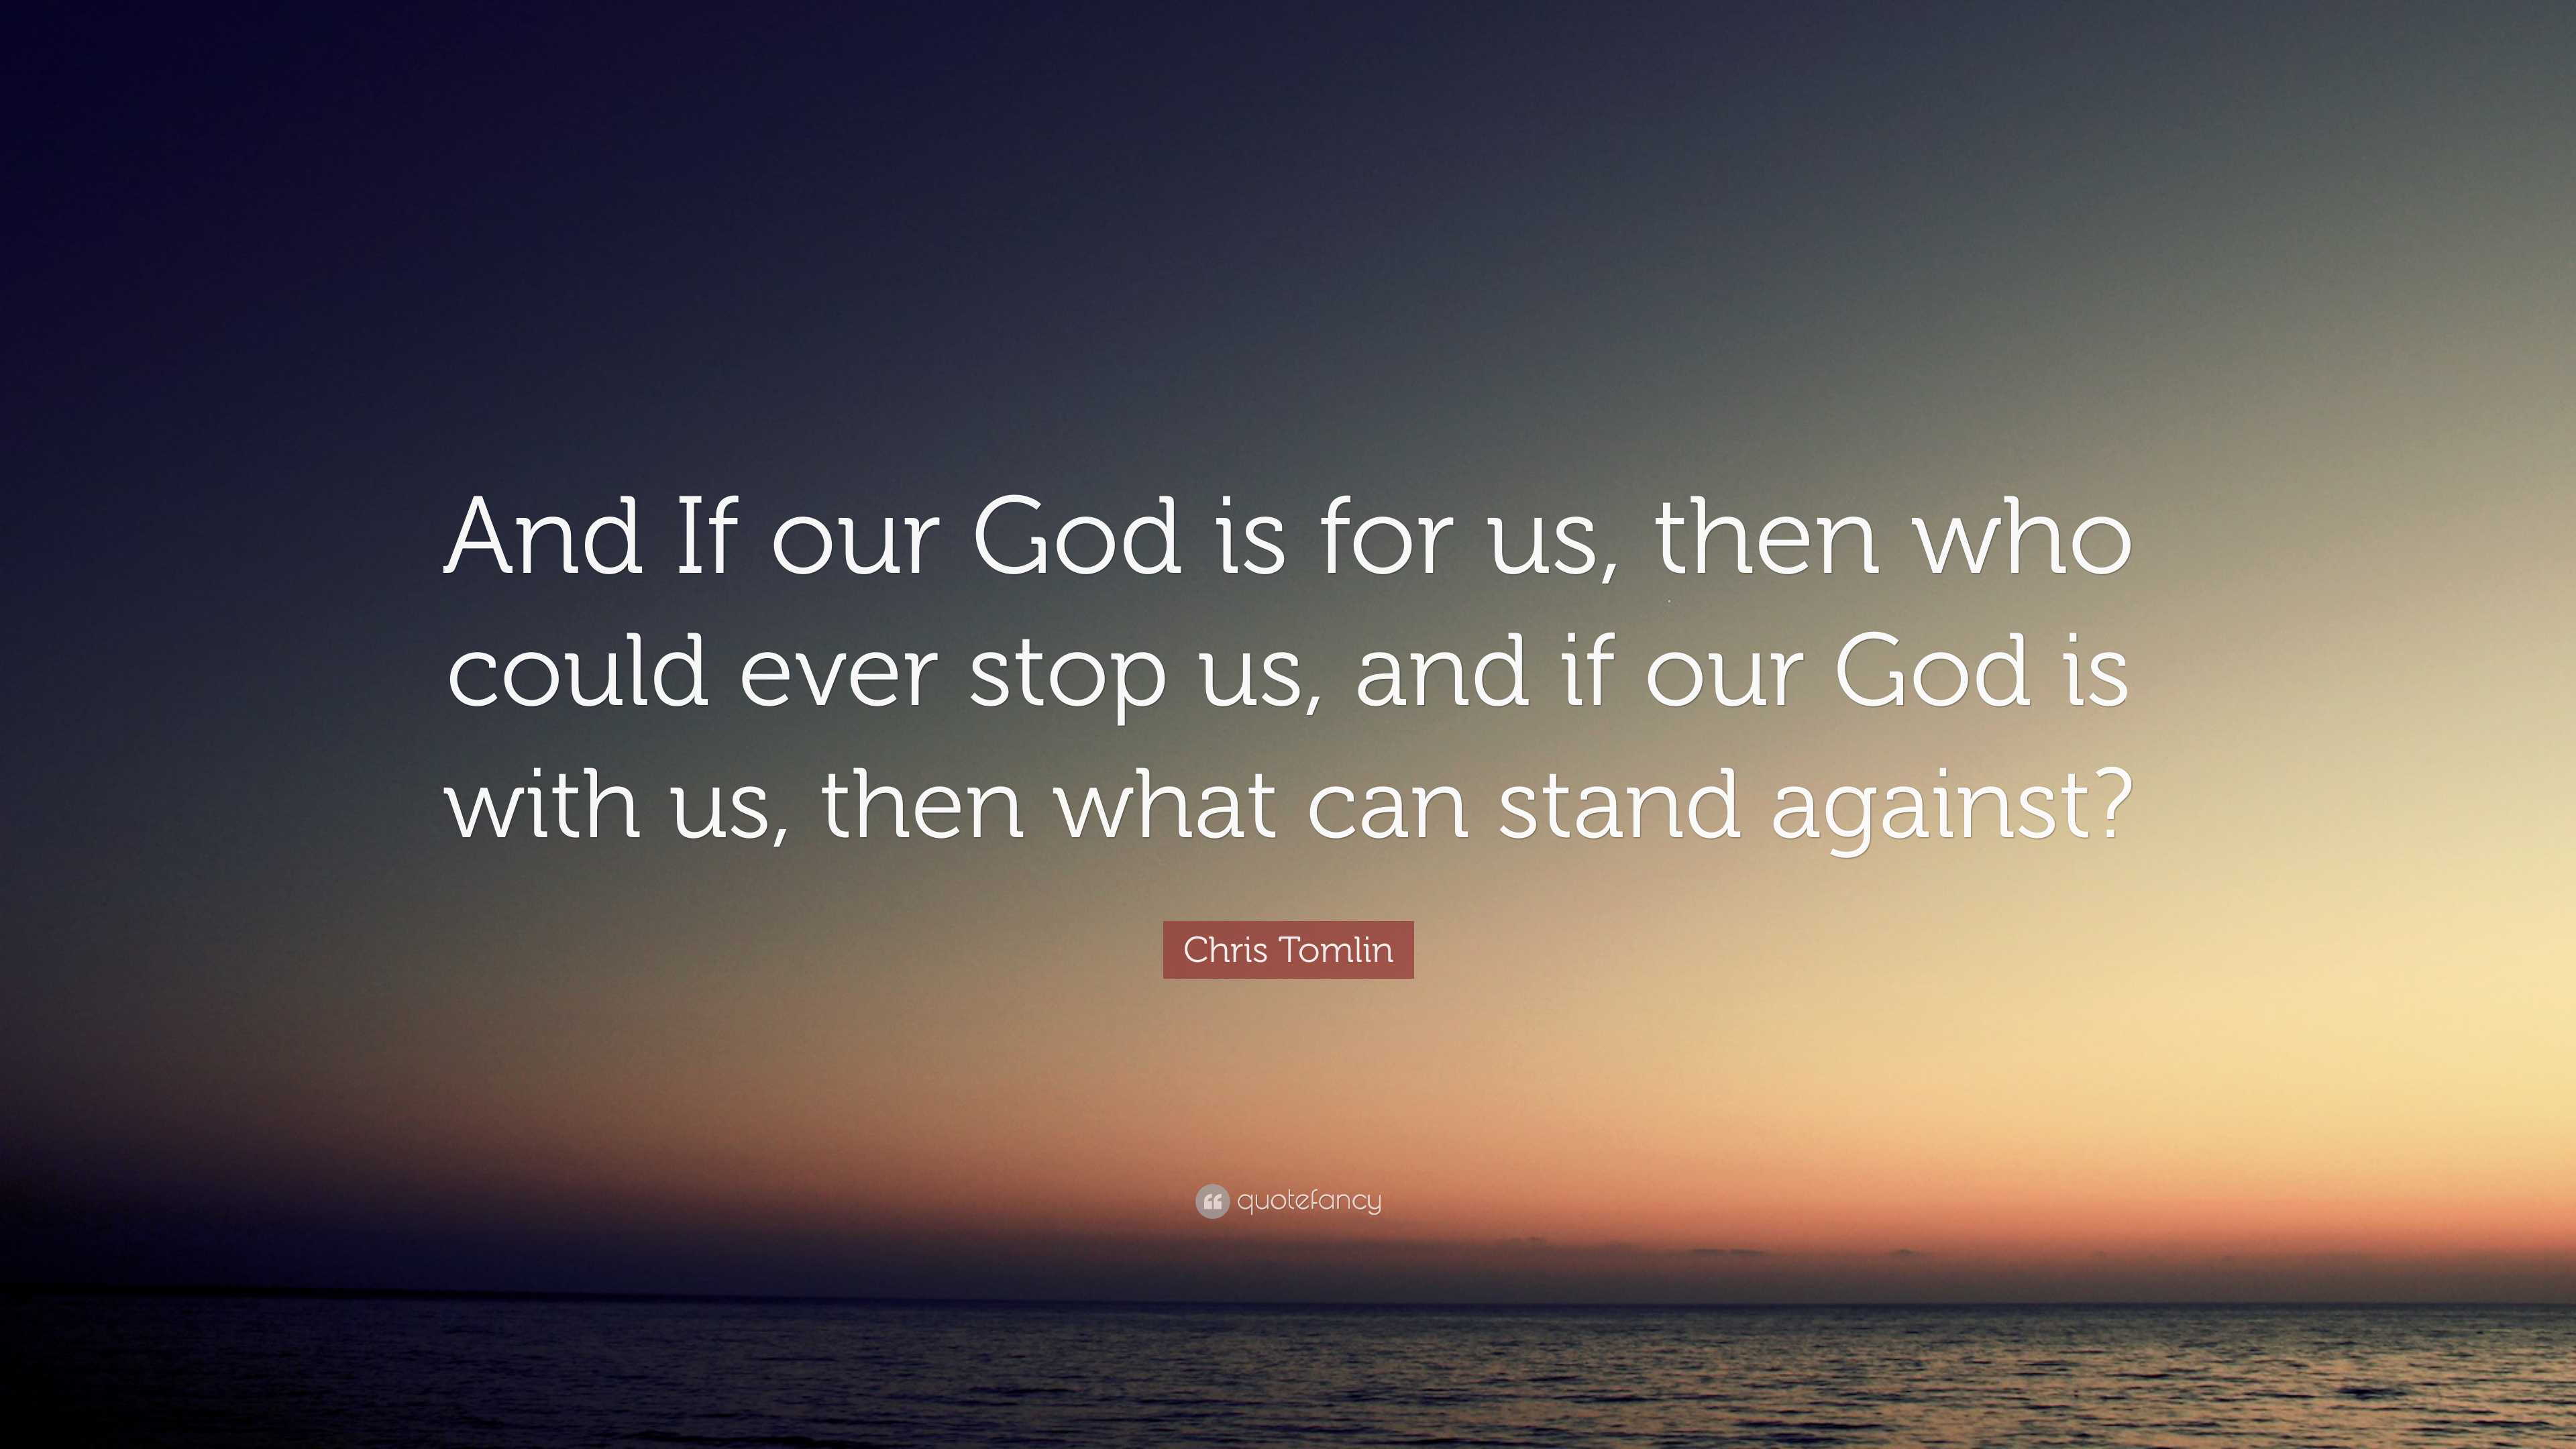 And If Our God Is for Us... 